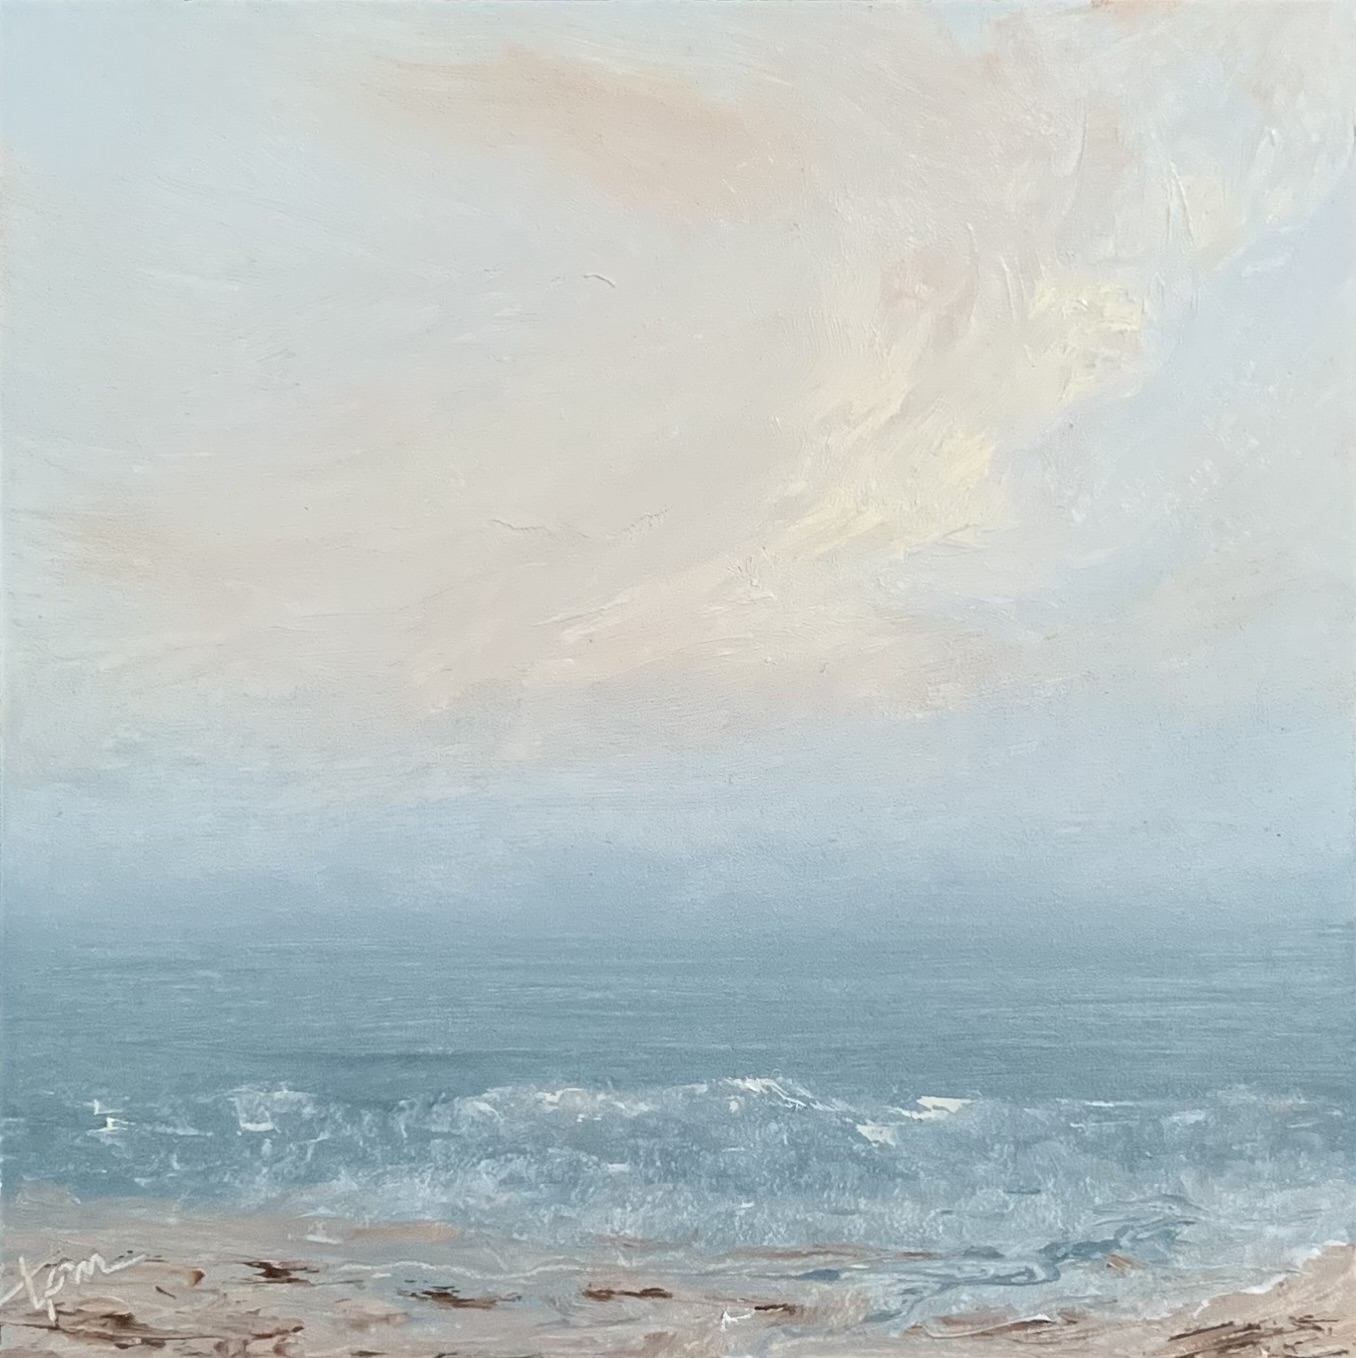 Original tiny oil painting by Tisha Mark, "Week 22, 52 Weeks of Finding Light Series" 4"x4" oil on gessobord (2023). This tiny seascape features soft, pastel tones of textured sunlight in the sky over a calm sea meeting the shore.